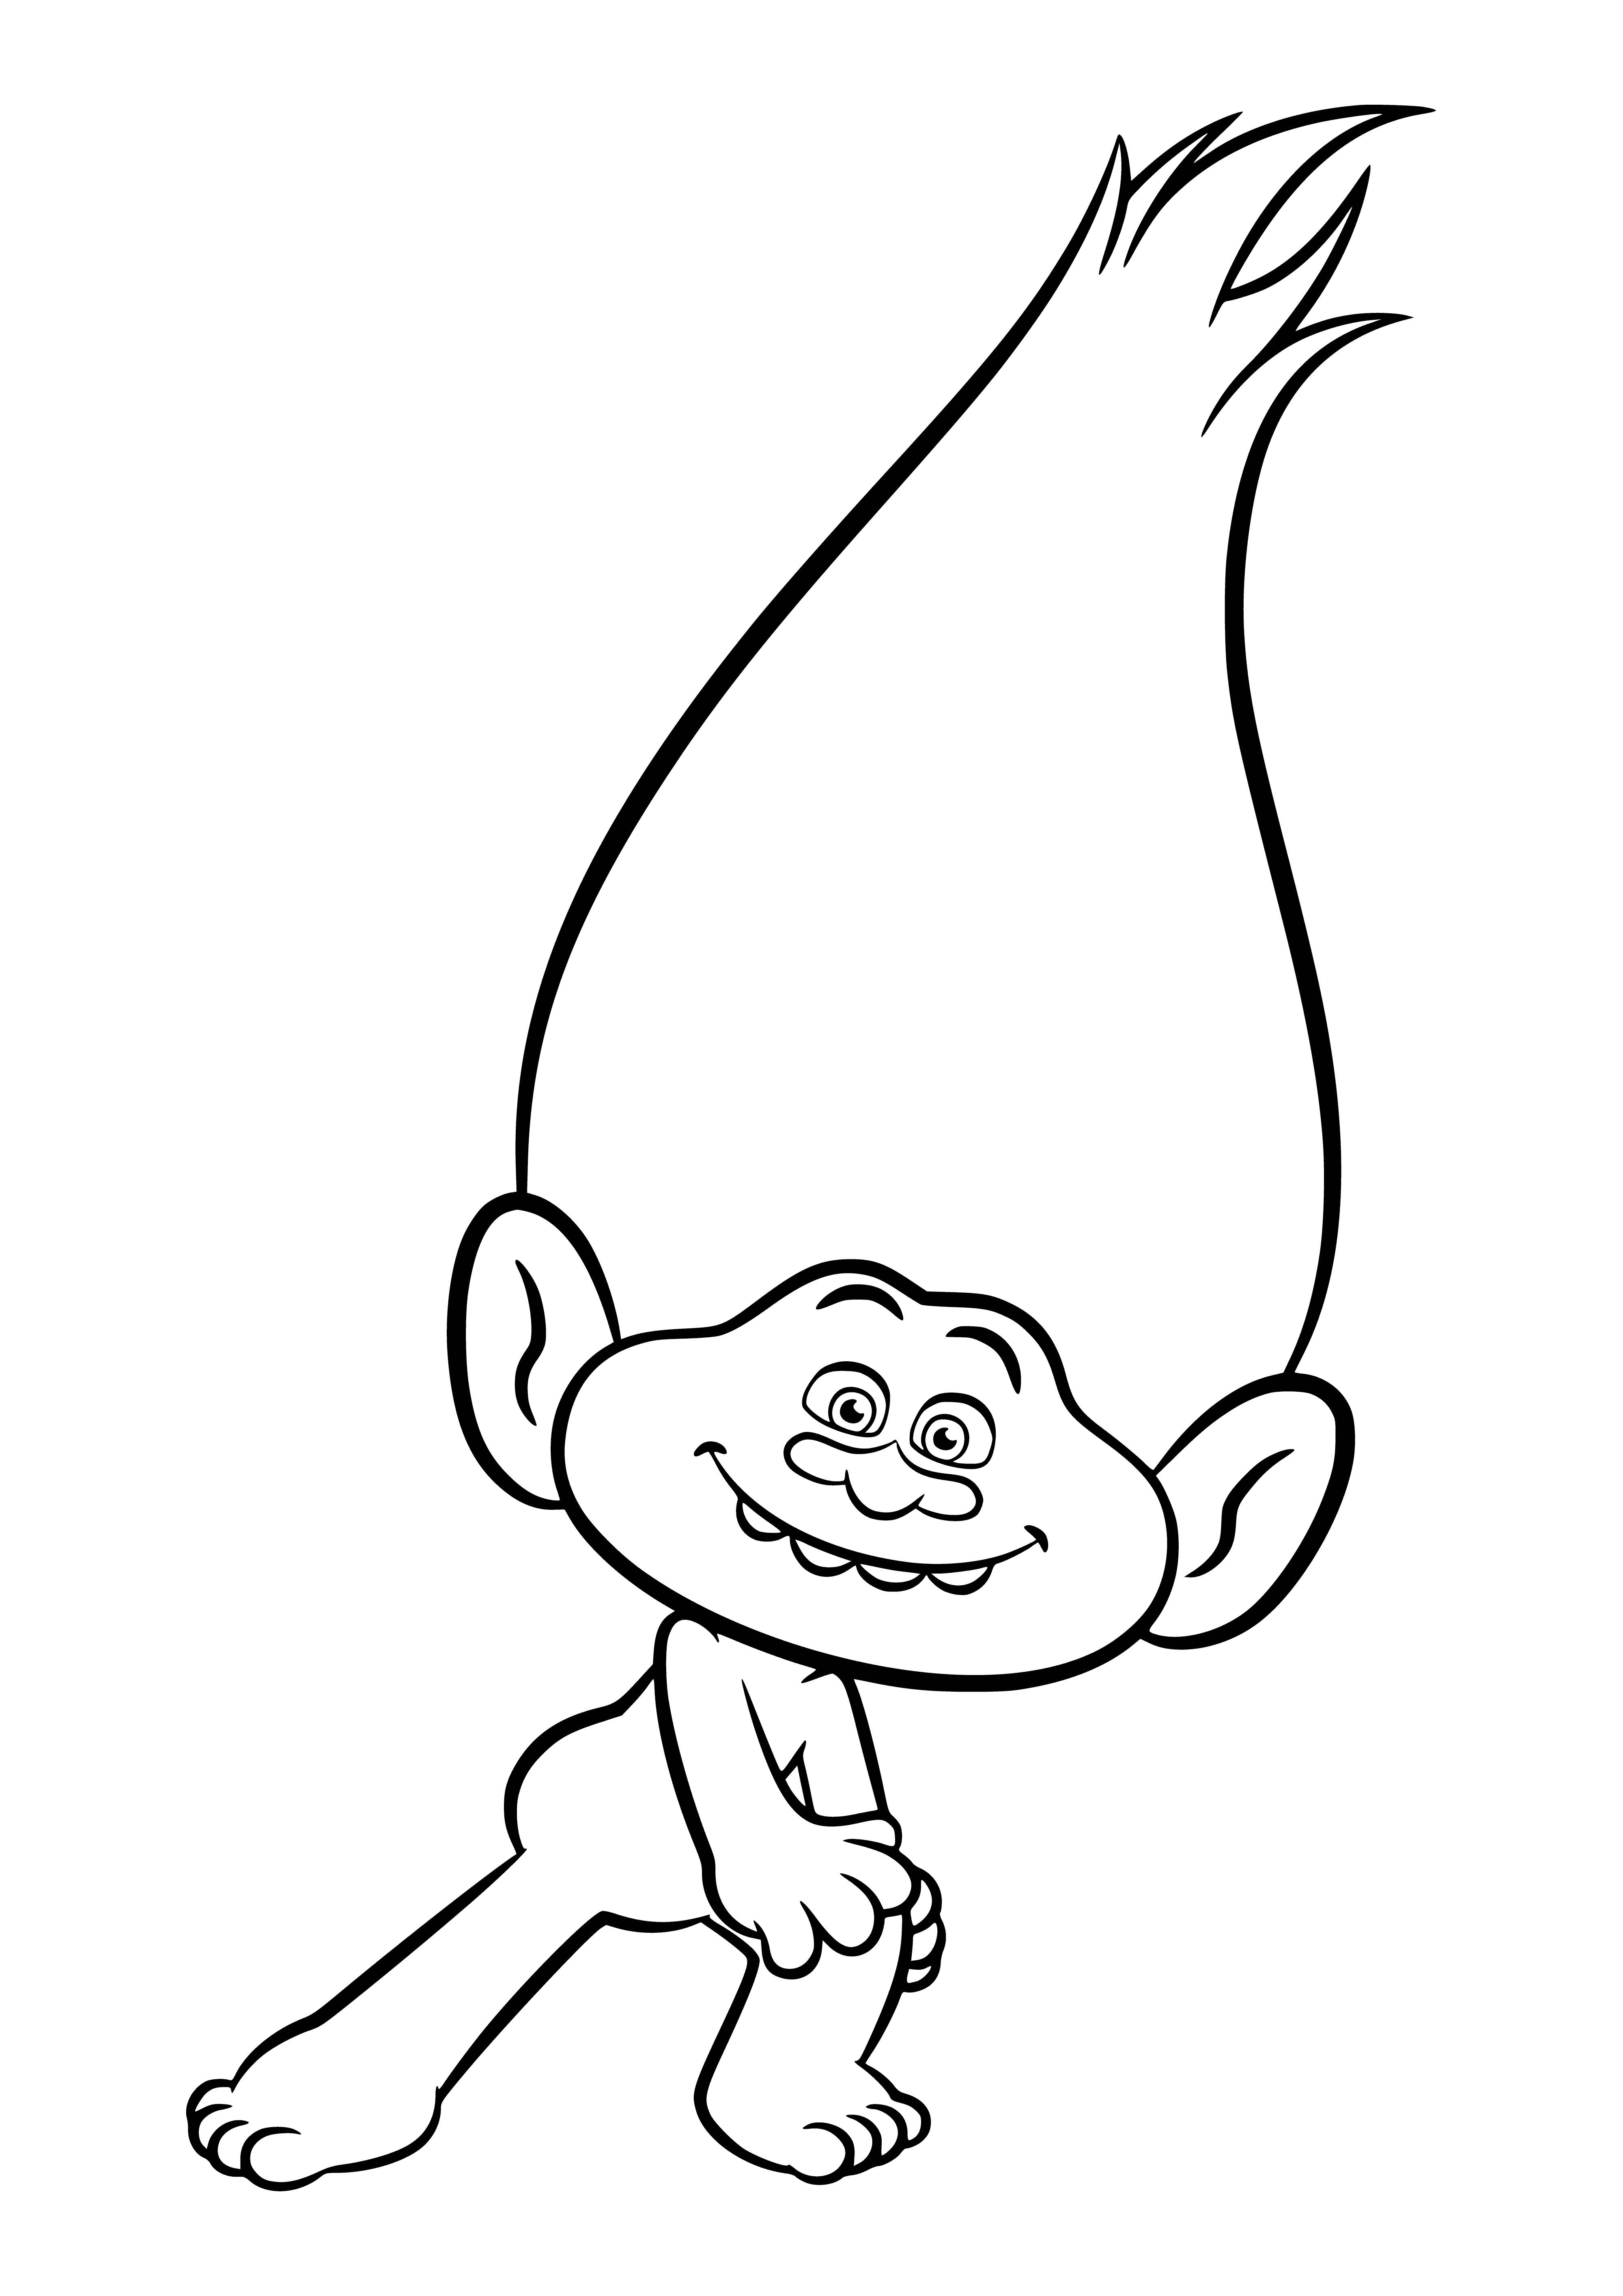 coloring page: A diamond-shaped object with a face, big nose, small eyes, big open mouth with sharp teeth, wearing a green and purple hat with a yellow feather.